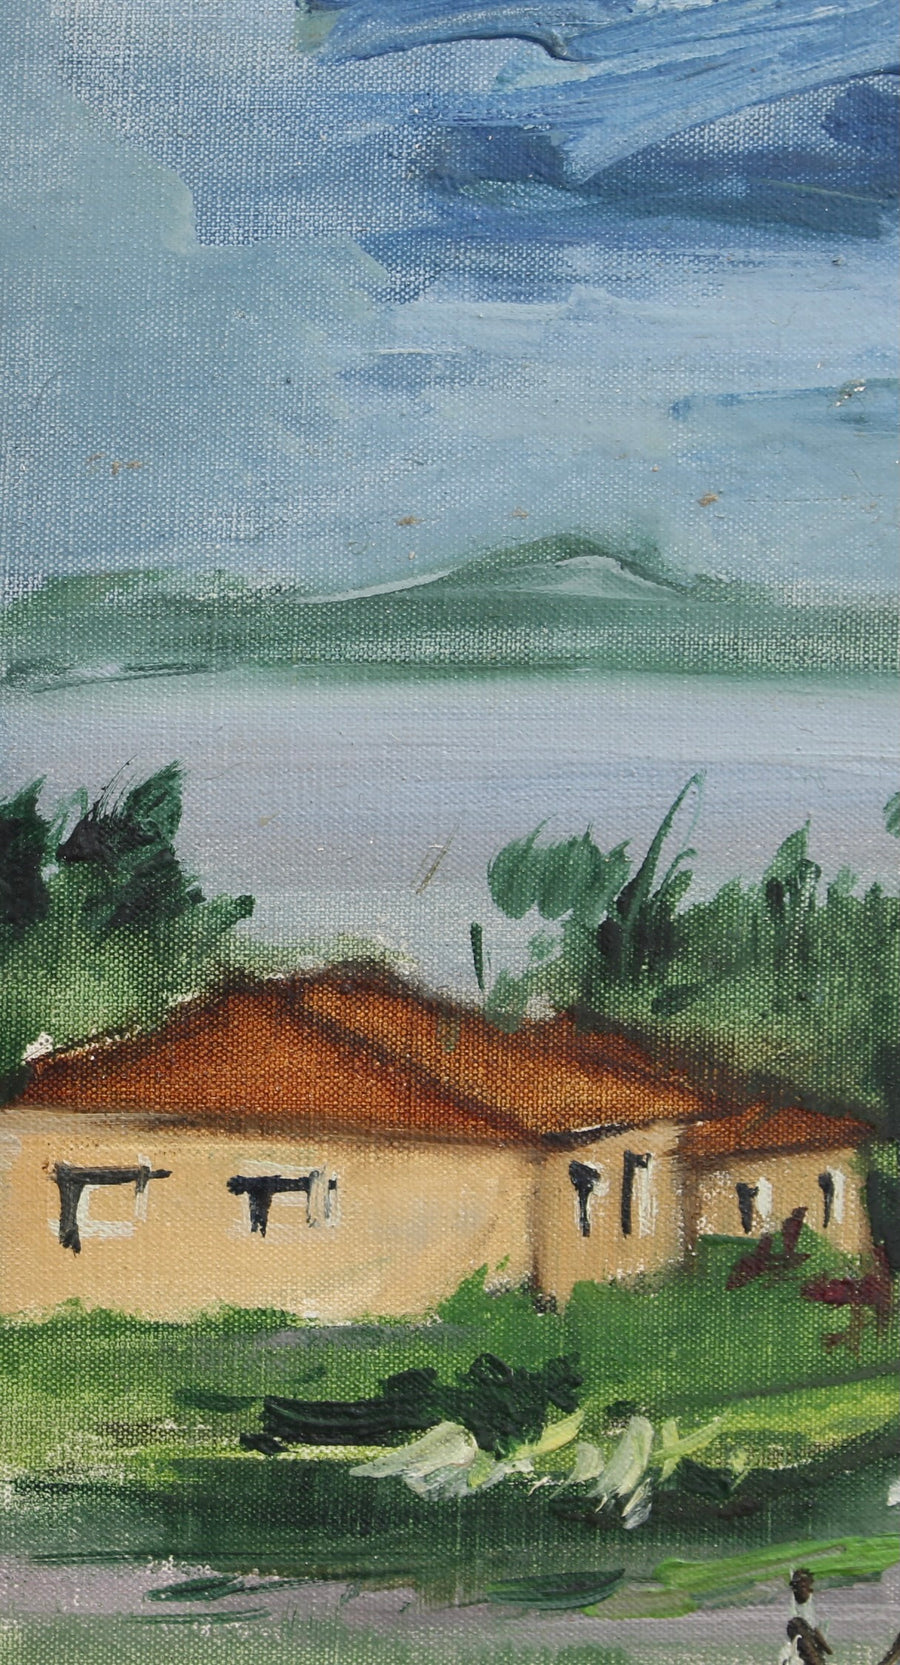 'The Bay of Fort-de-France Martinique' by Robert Humblot (1959)